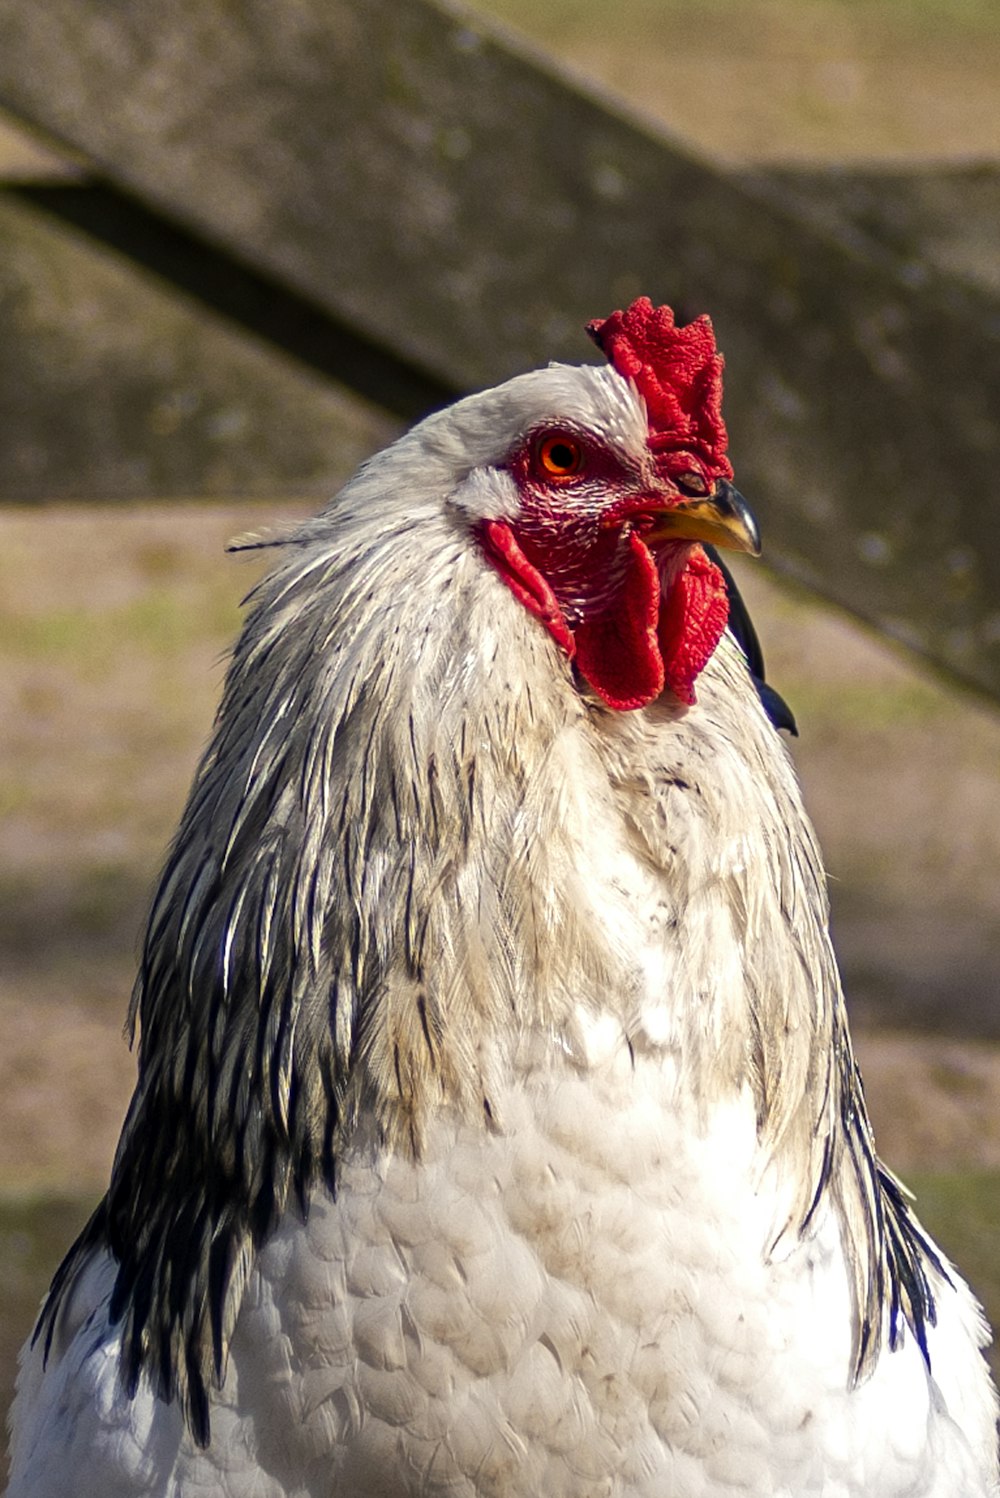 white and black rooster in close up photography